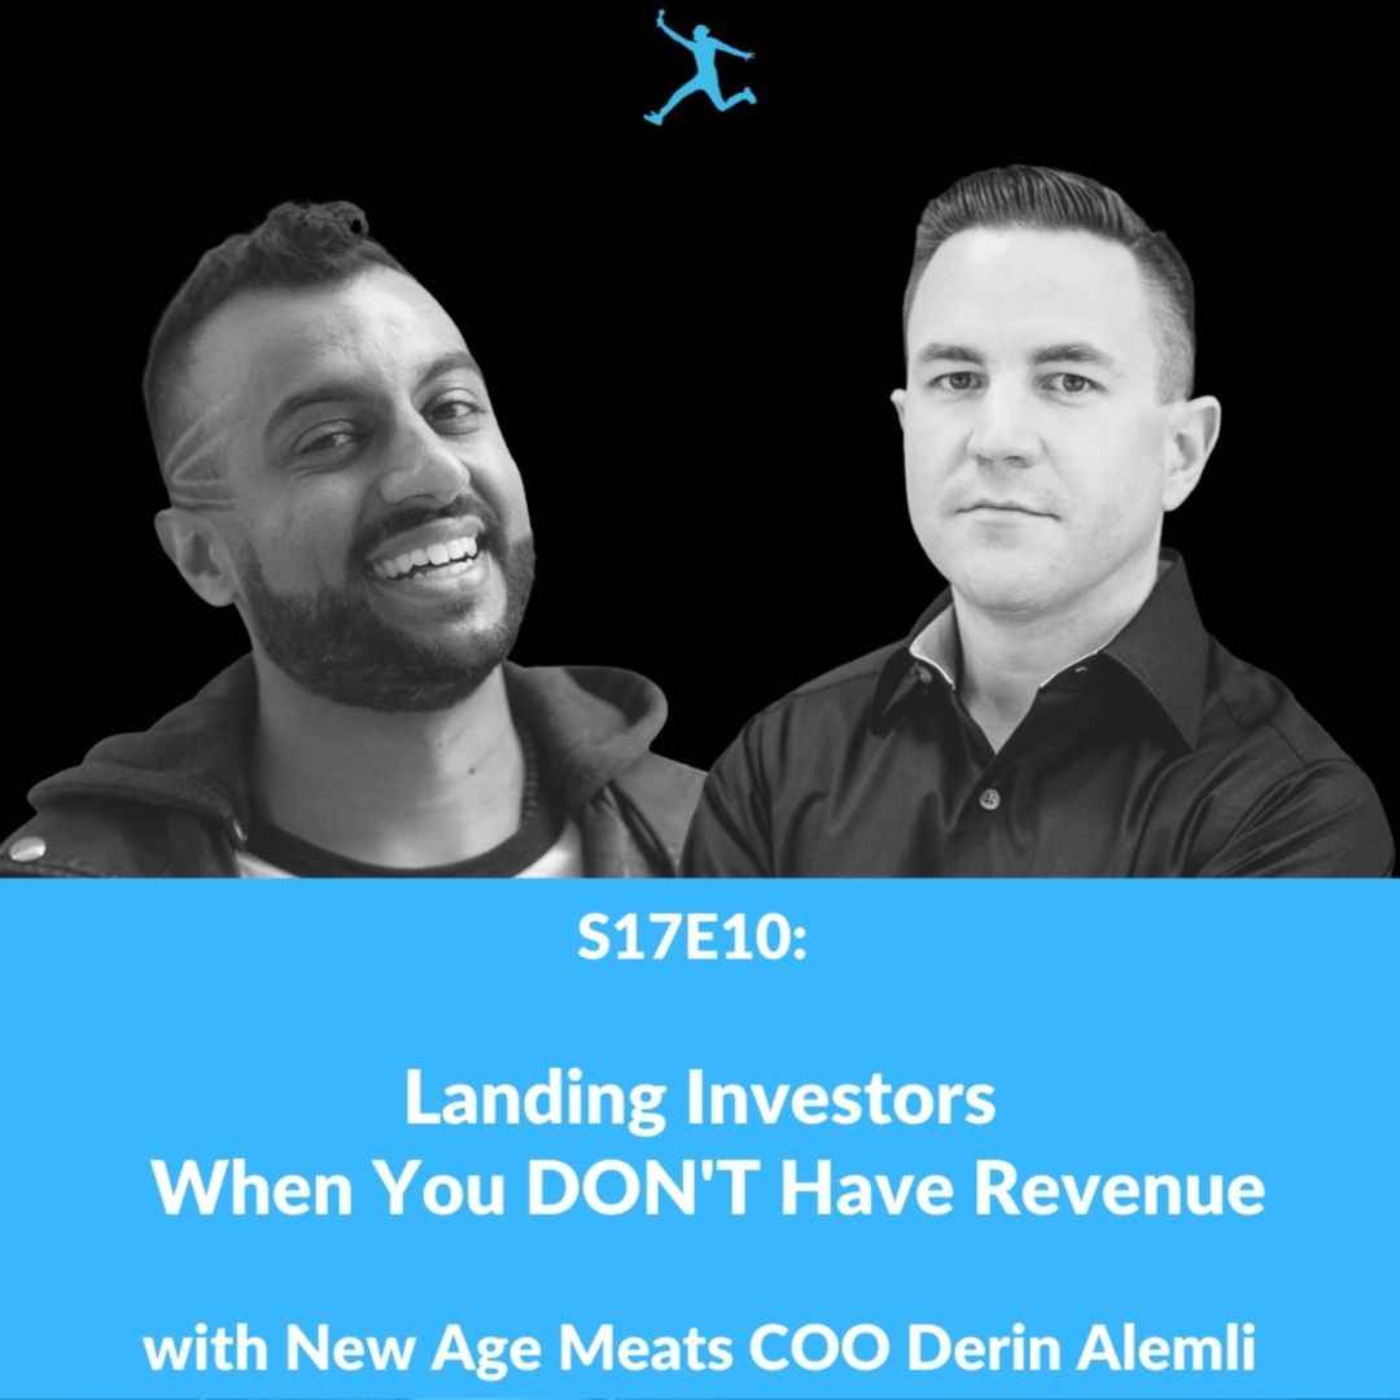 S17E10: Landing Investors When You DON'T Have Revenue with New Age Meats COO Derin Alemli